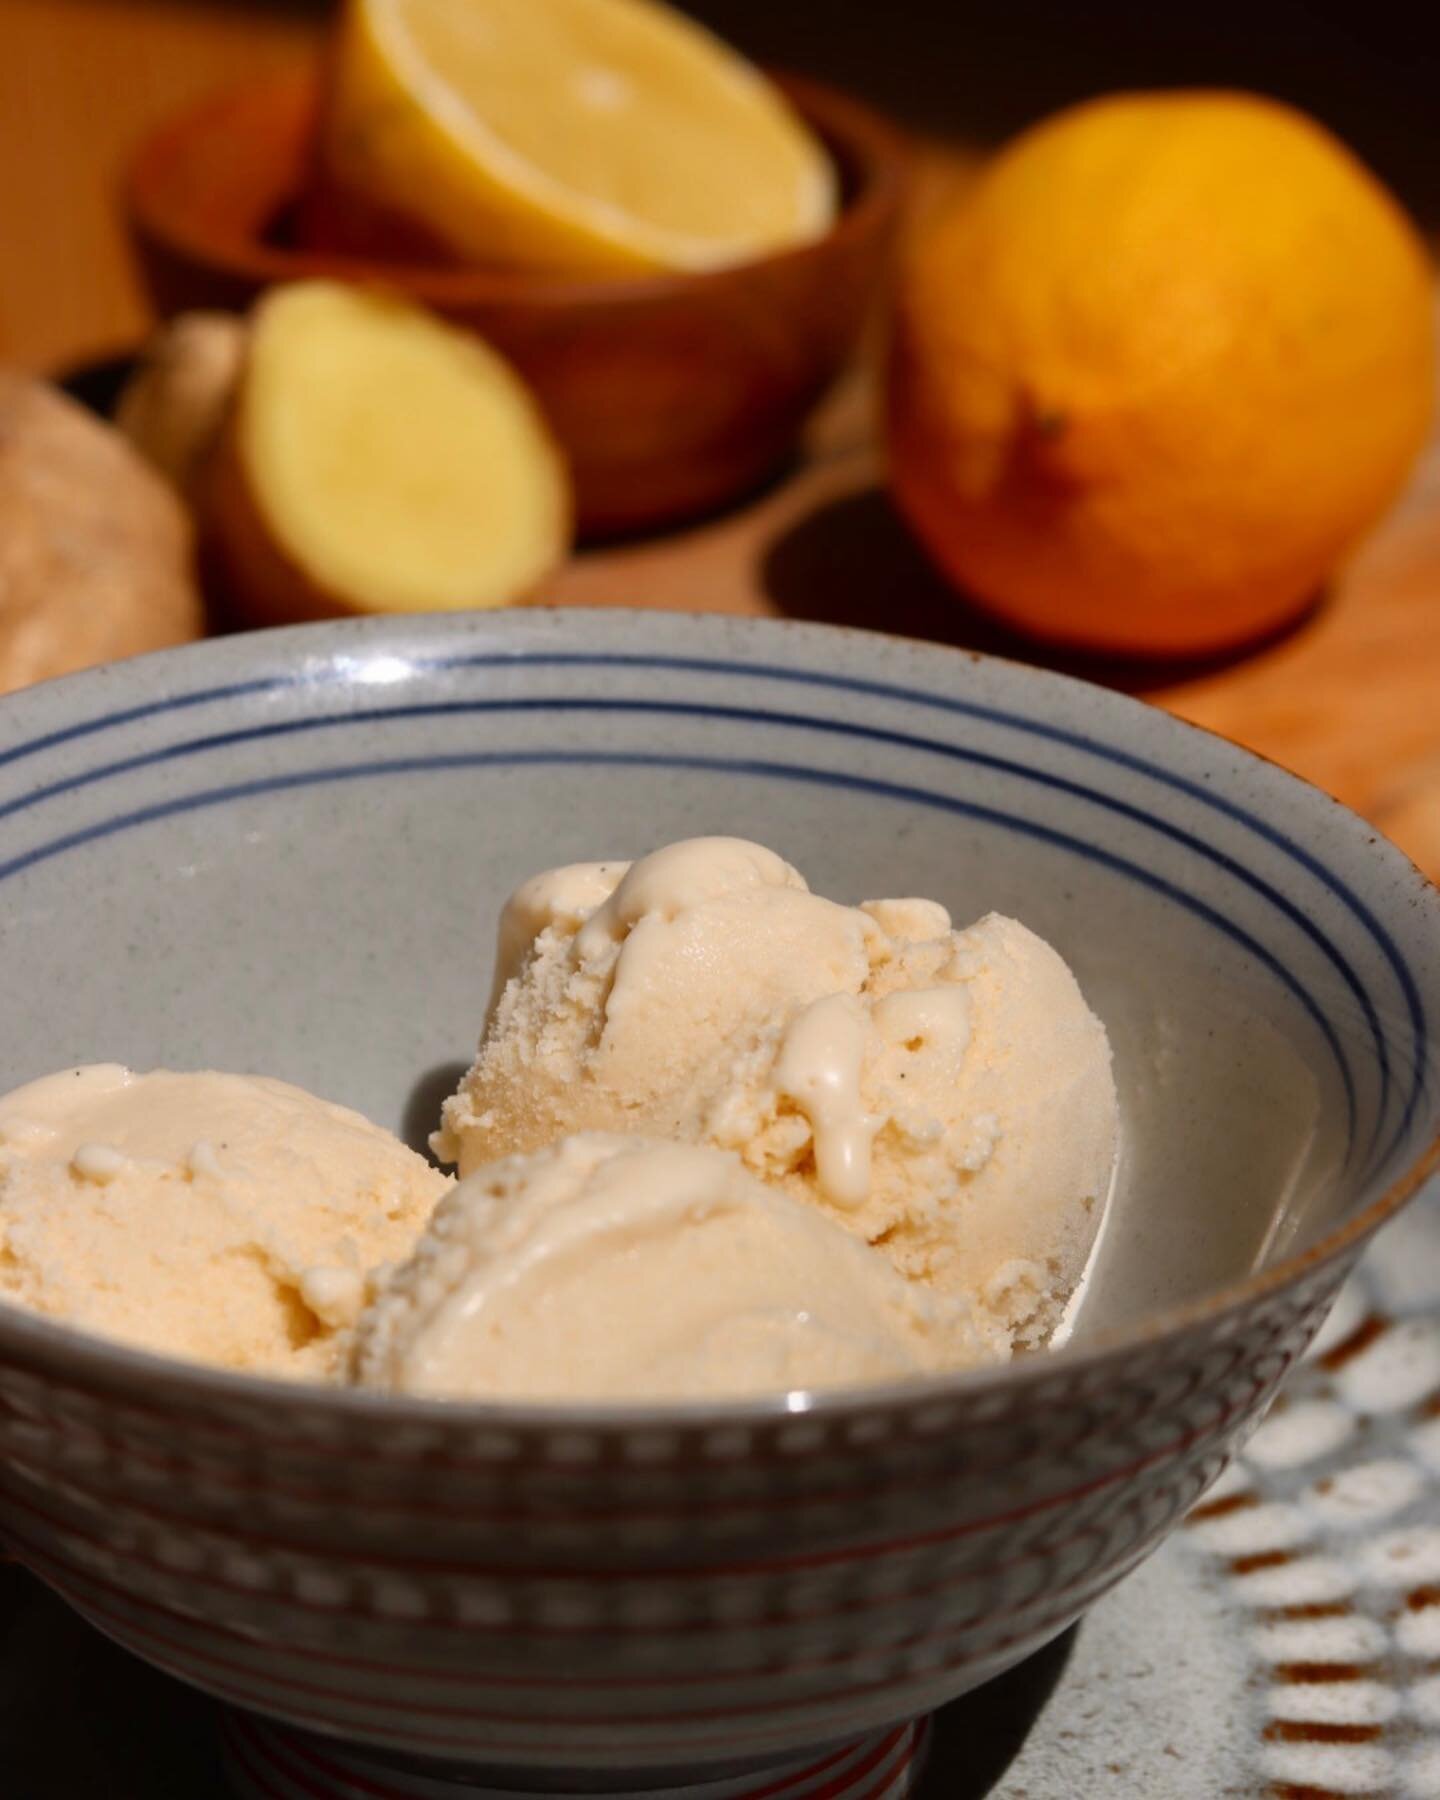 A refreshing ice cream with the classic tea flavour - simple yet impressive. Also my first attempt at filming a recipe.
 
I decided to do a simple recipe for my first filming attempt. Most of my ice cream recipes have the same base and method, and th